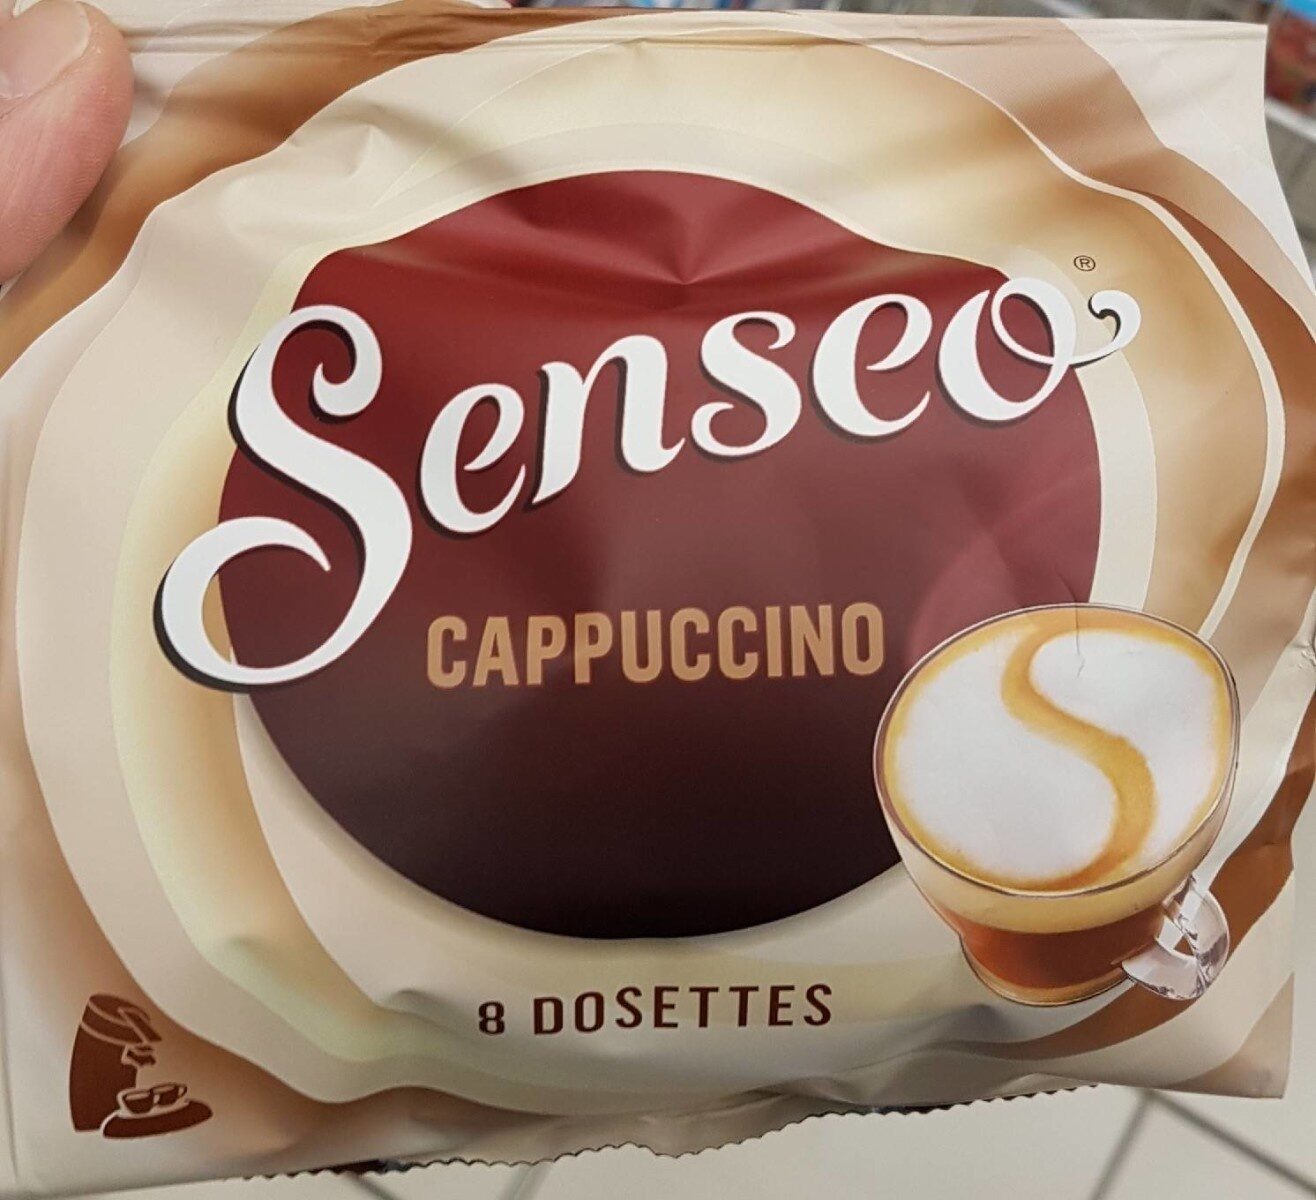 cappuccino - Product - fr